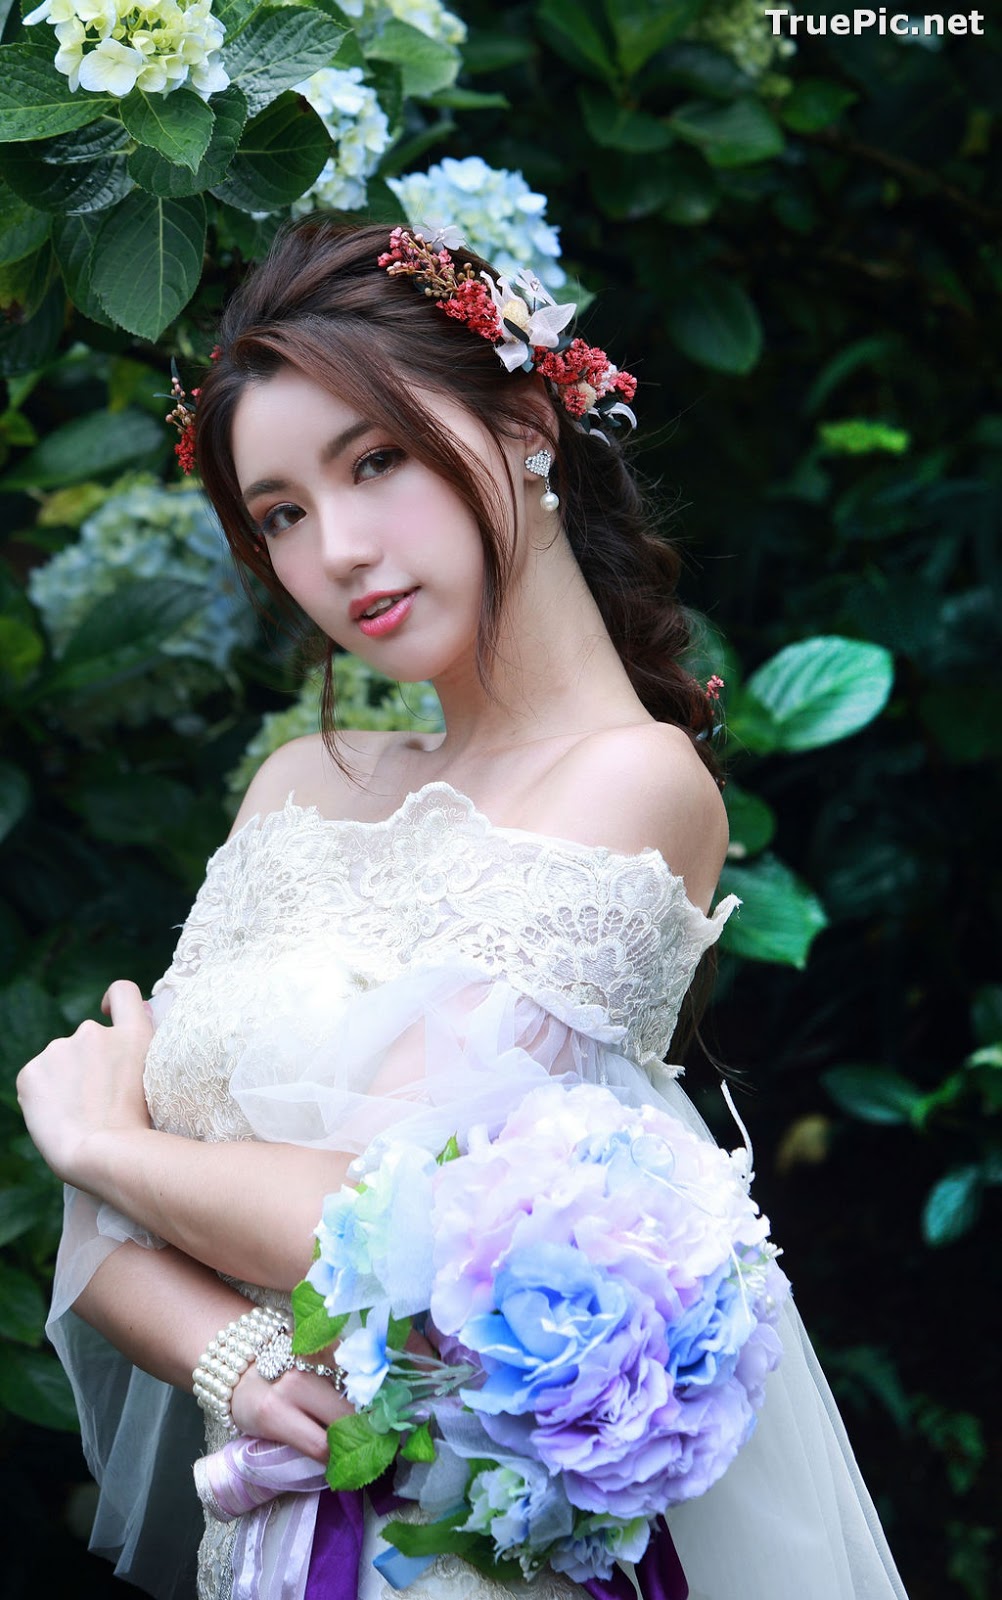 Image Taiwanese Model - 張倫甄 - Beautiful Bride and Hydrangea Flowers - TruePic.net - Picture-24